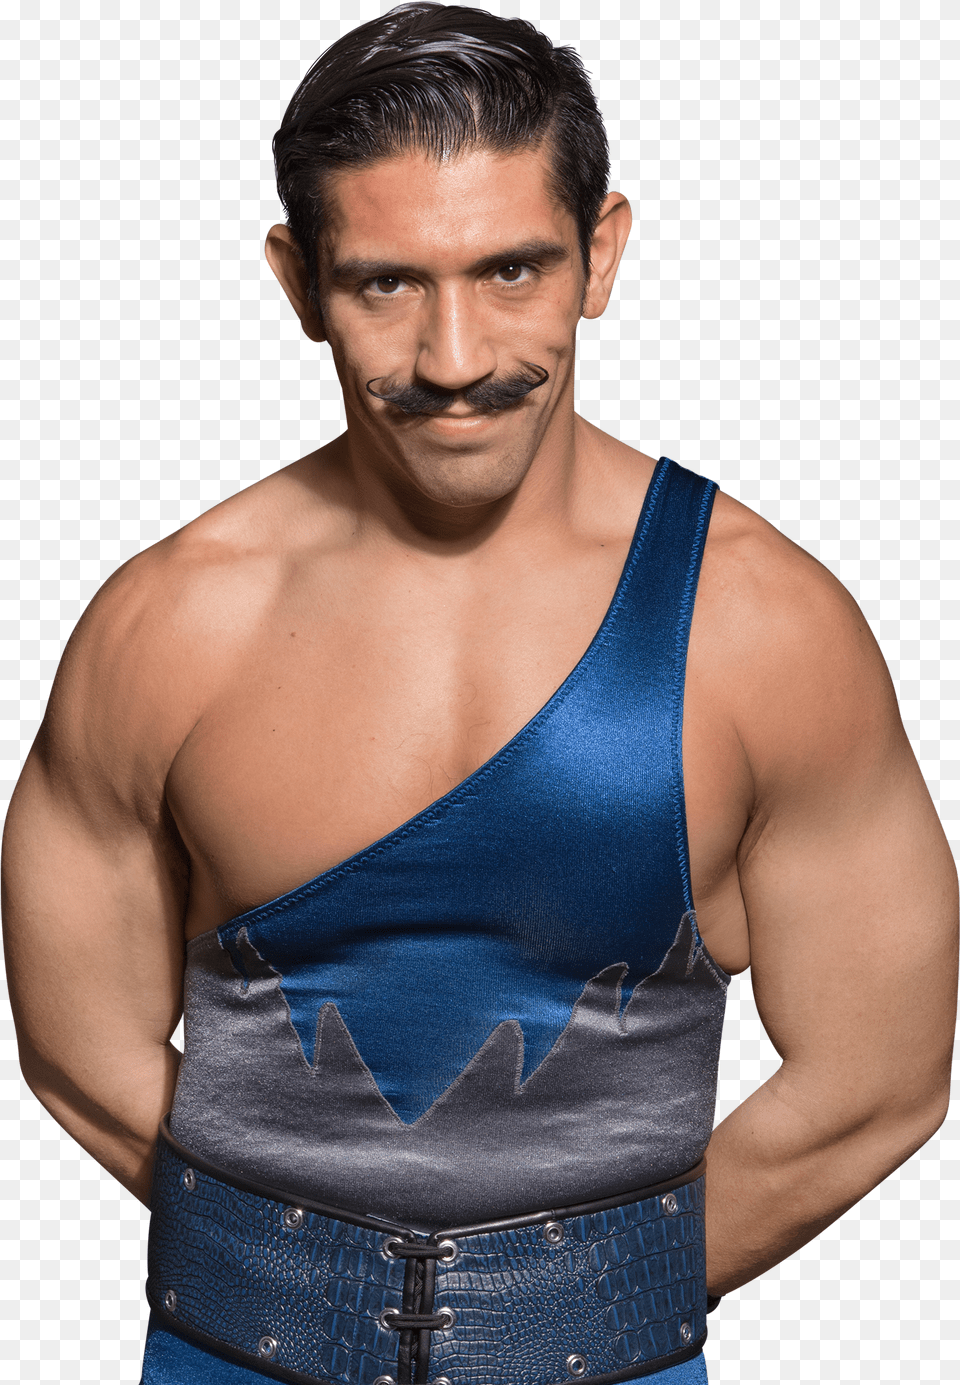 Andre The Giant Hulk Hogan Simon Gotch, Adult, Person, Man, Male Png